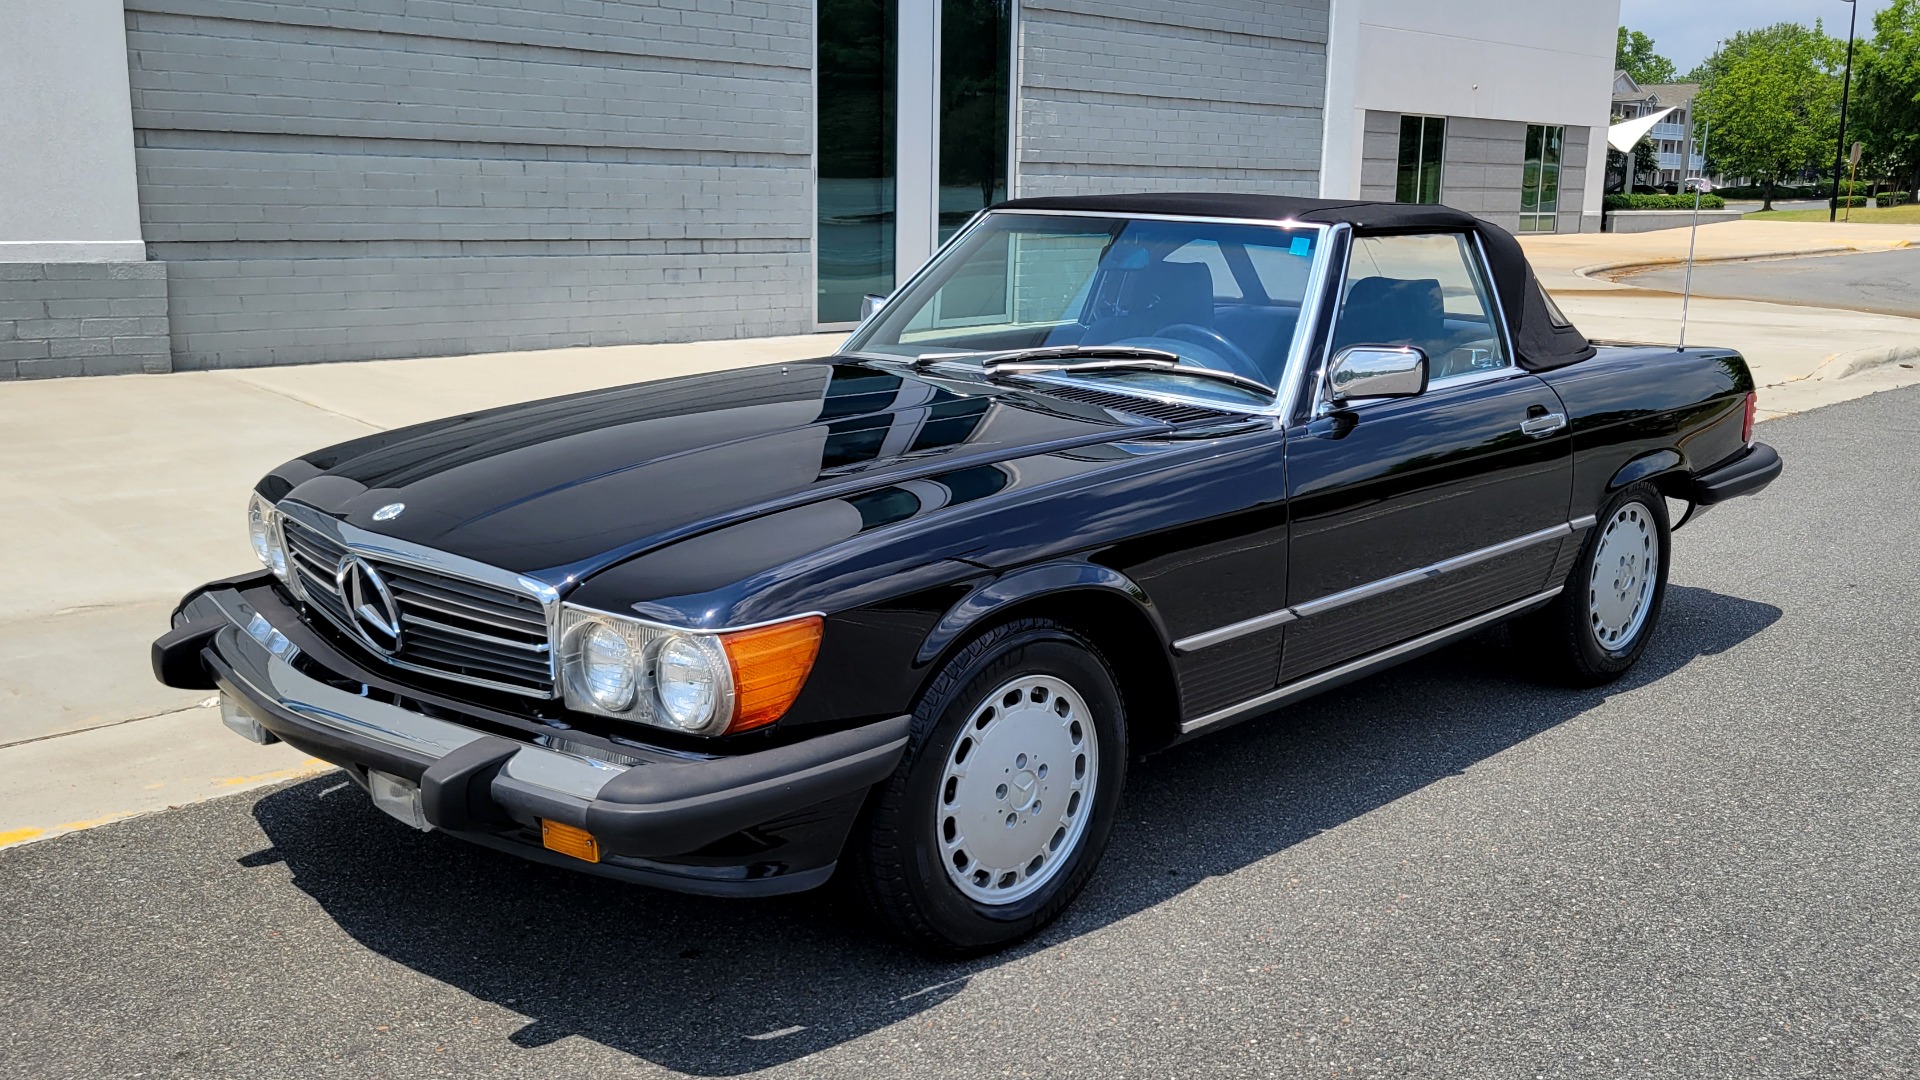 Used 1989 Mercedes-Benz 560 SERIES 560SL ROADSTER / 5.6L V8 227HP / AUTOMATIC TRANS for sale $24,999 at Formula Imports in Charlotte NC 28227 4